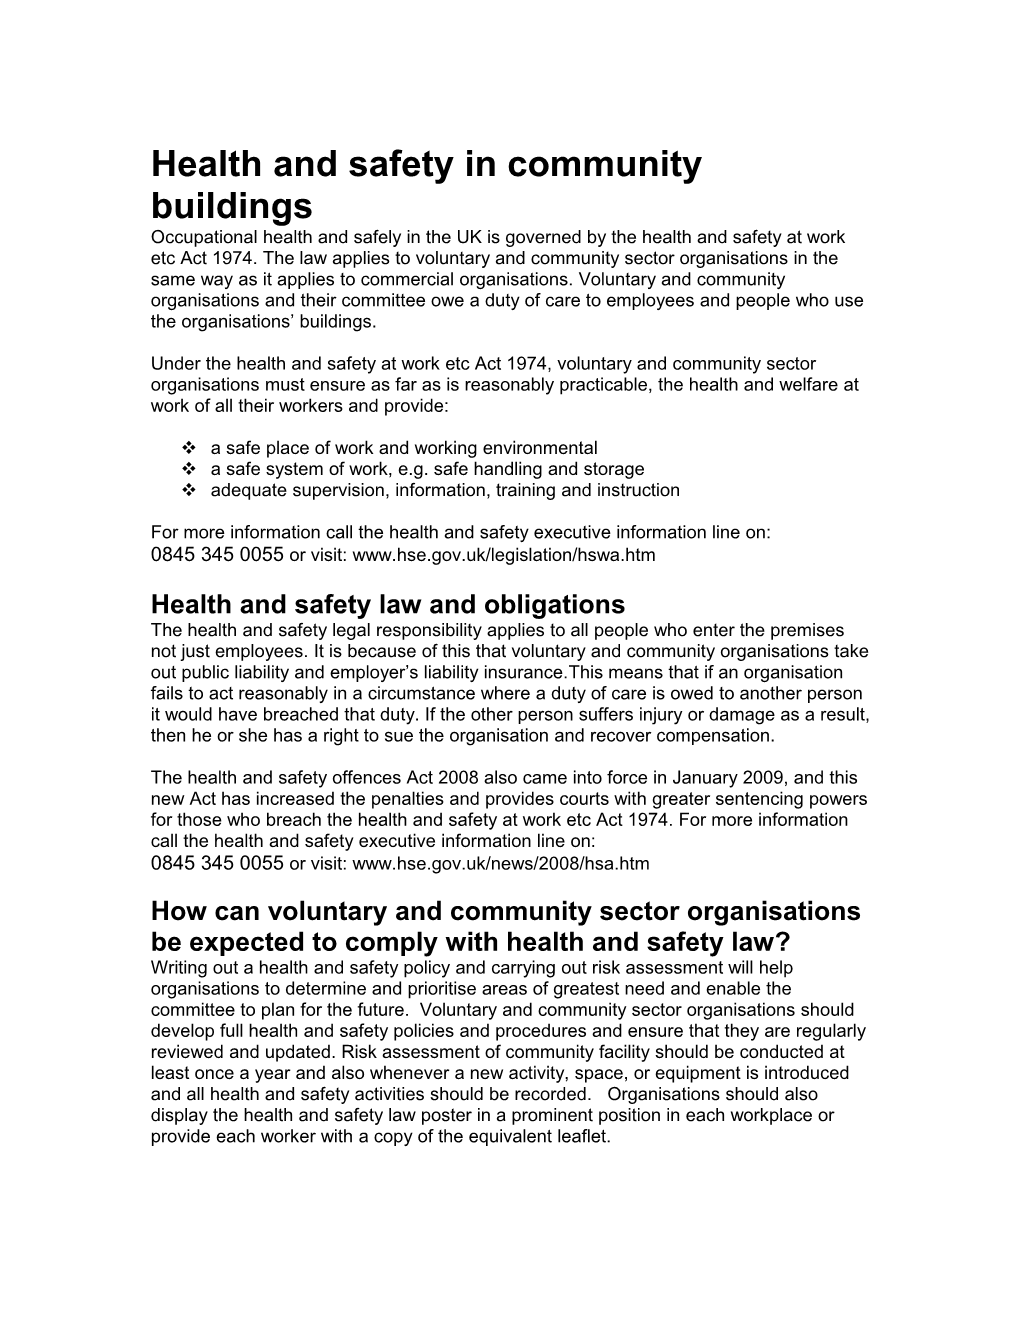 Health and Safety in Community Buildings